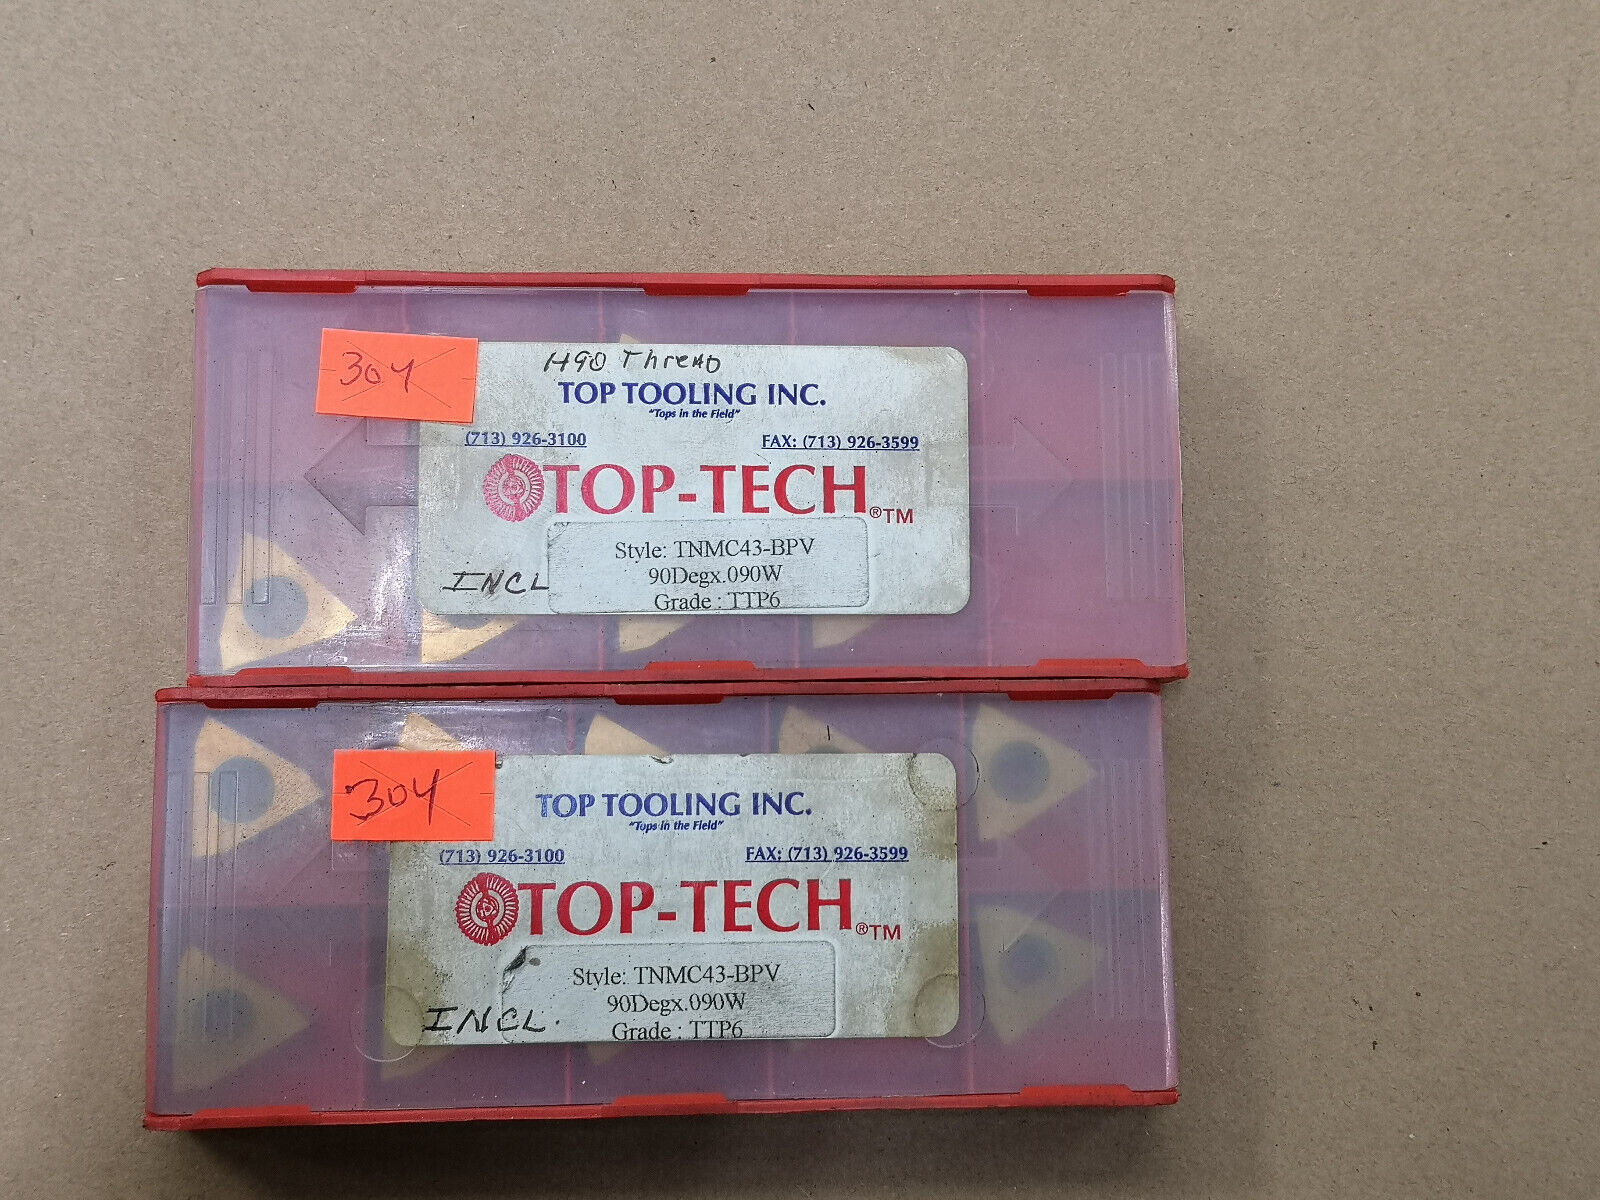 TOP TECH TOP TOOLING TNMC43-BPV 90 DEGREE CARBIDE INSERTS  PACK OF 16 LOT 304